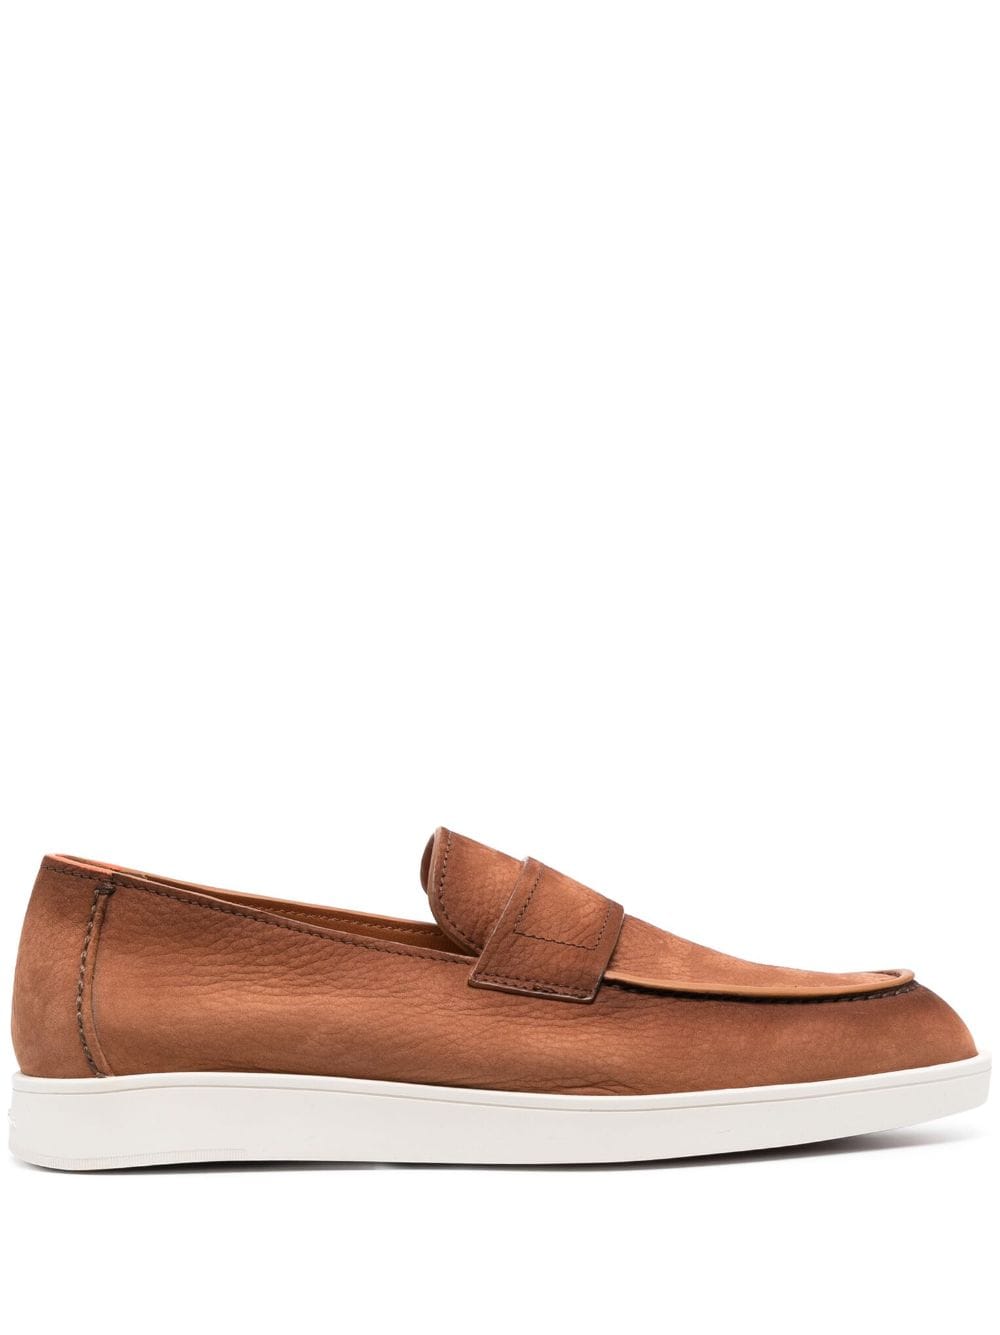 Santoni Slip-on Leather Loafers In Brown